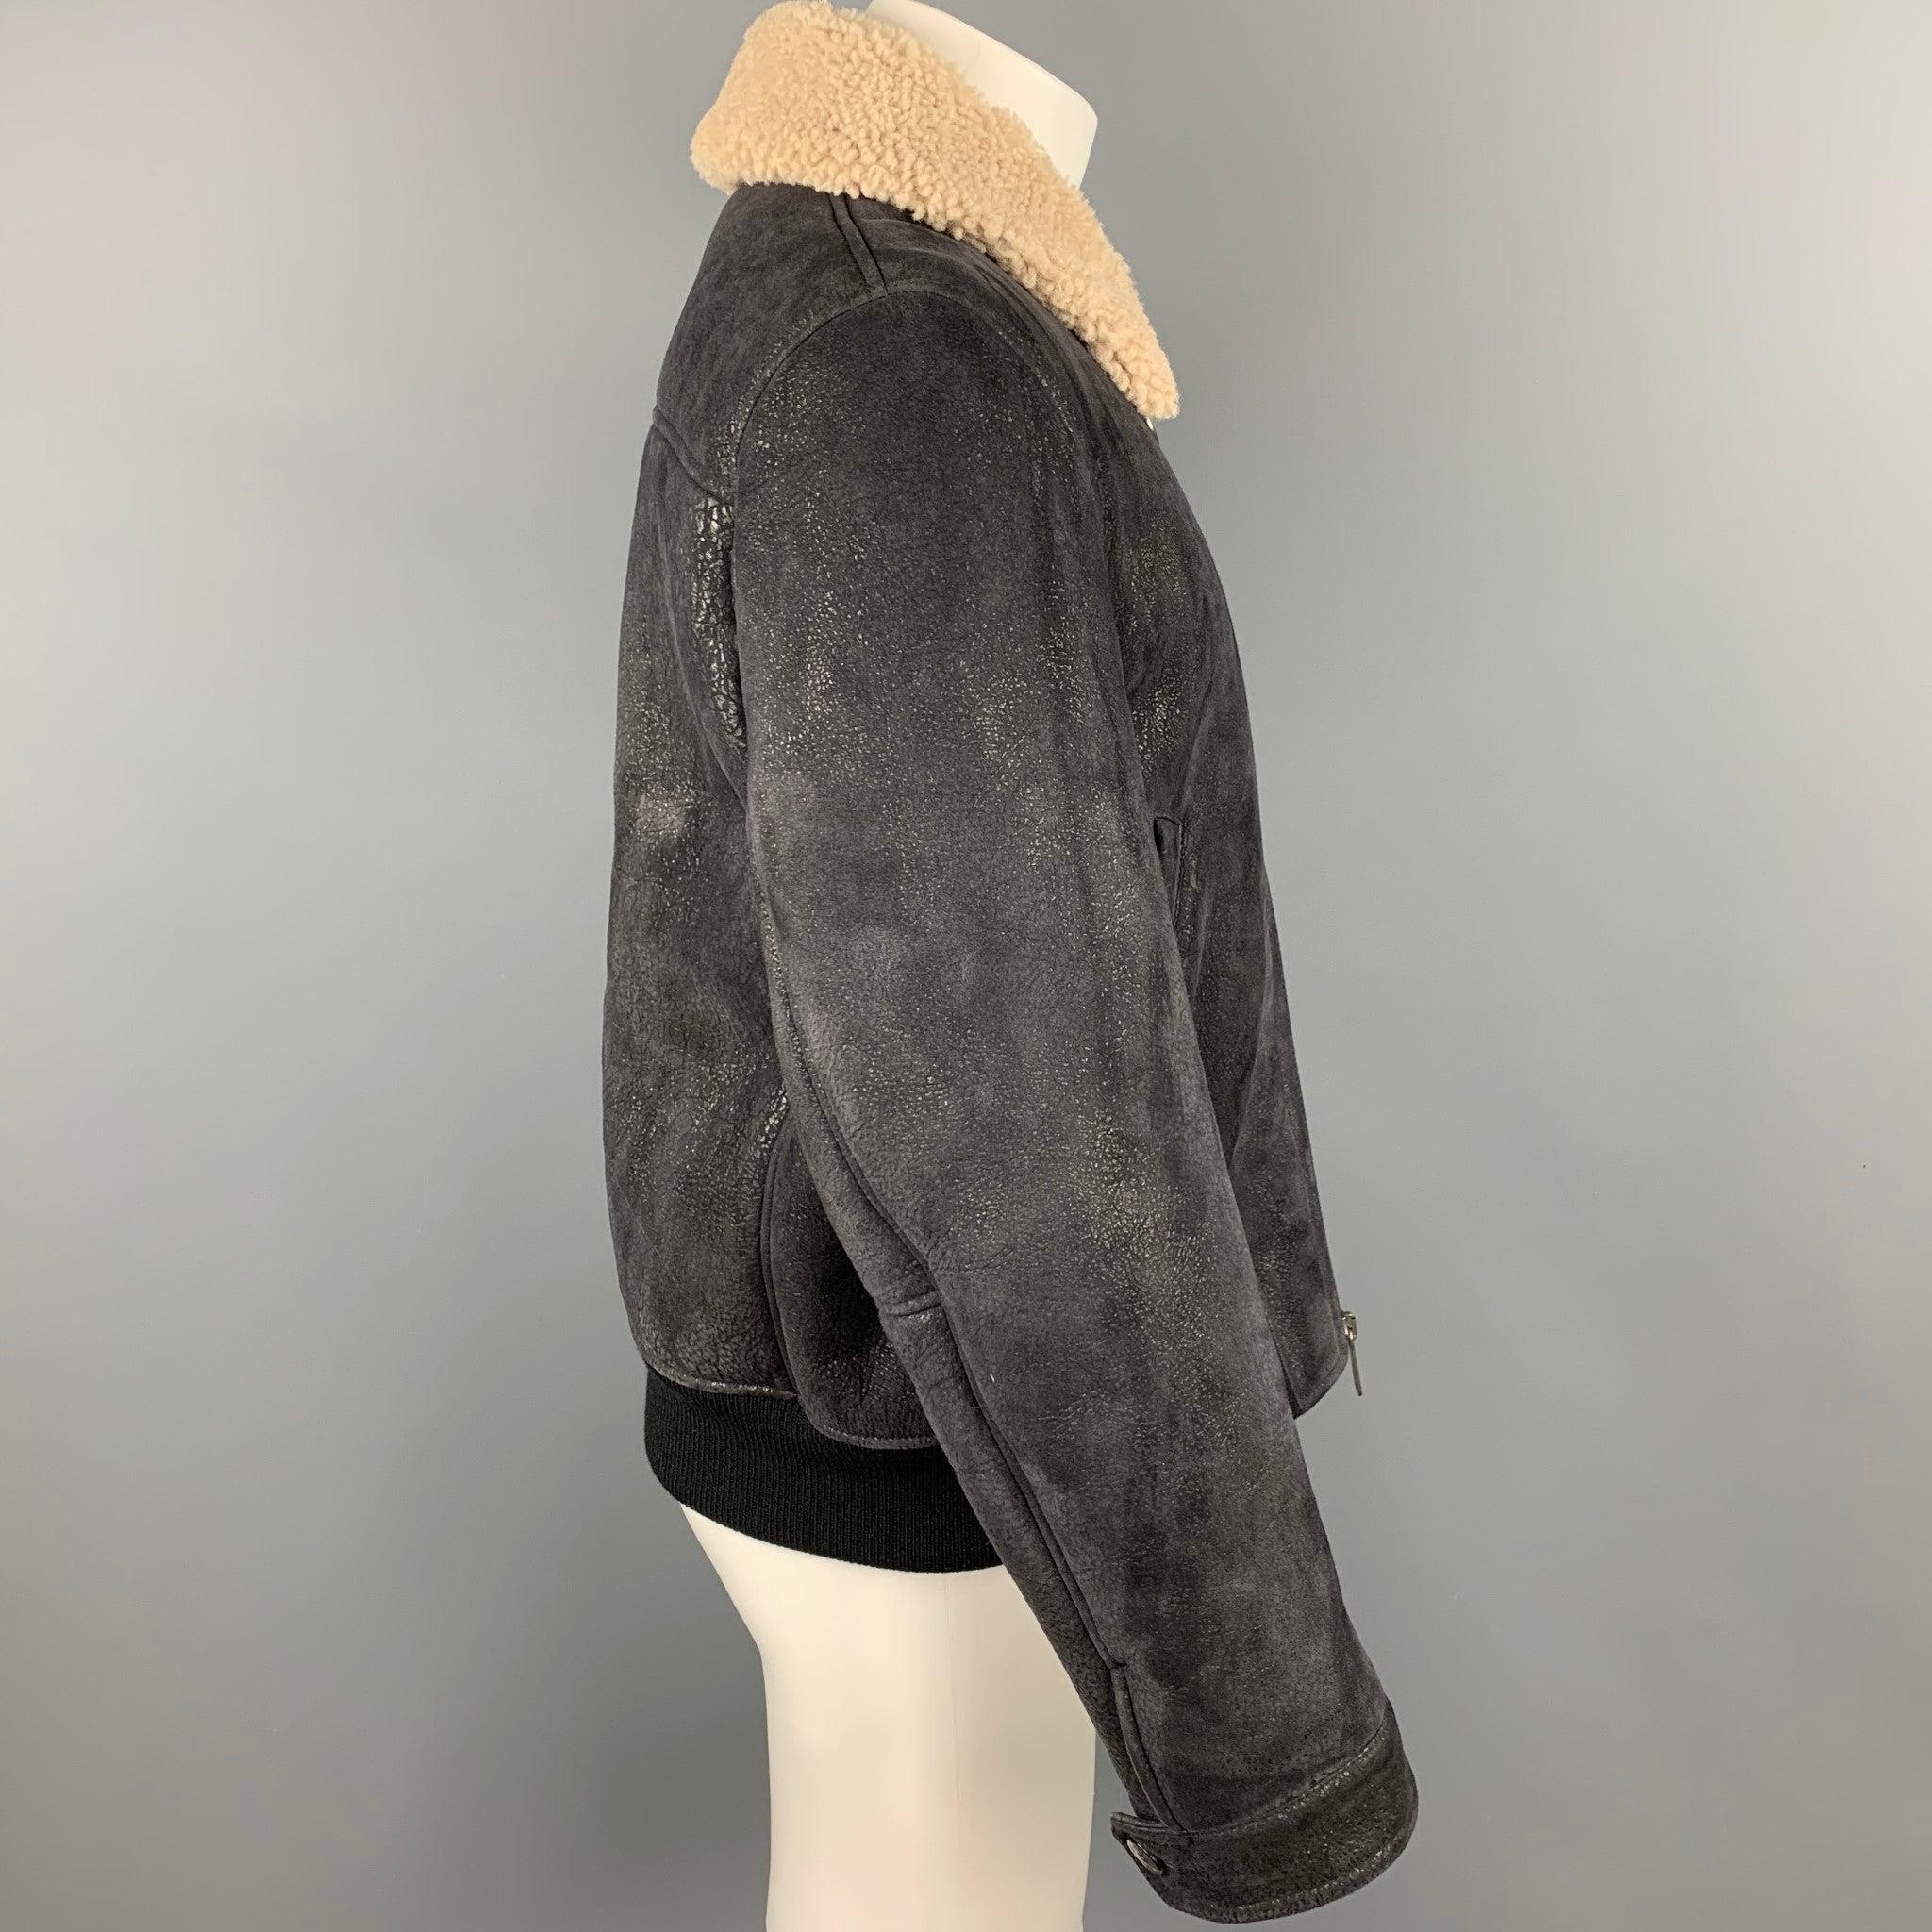 NEIL BARRETT jacket comes in a black textured lambskin featuring a skinny fit, fur collar, ribbed hem, slit pockets, anda full zip up closure. Made in Italy.Very Good
Pre-Owned Condition. 

Marked:   L 

Measurements: 
 
Shoulder:
17.5 inches 